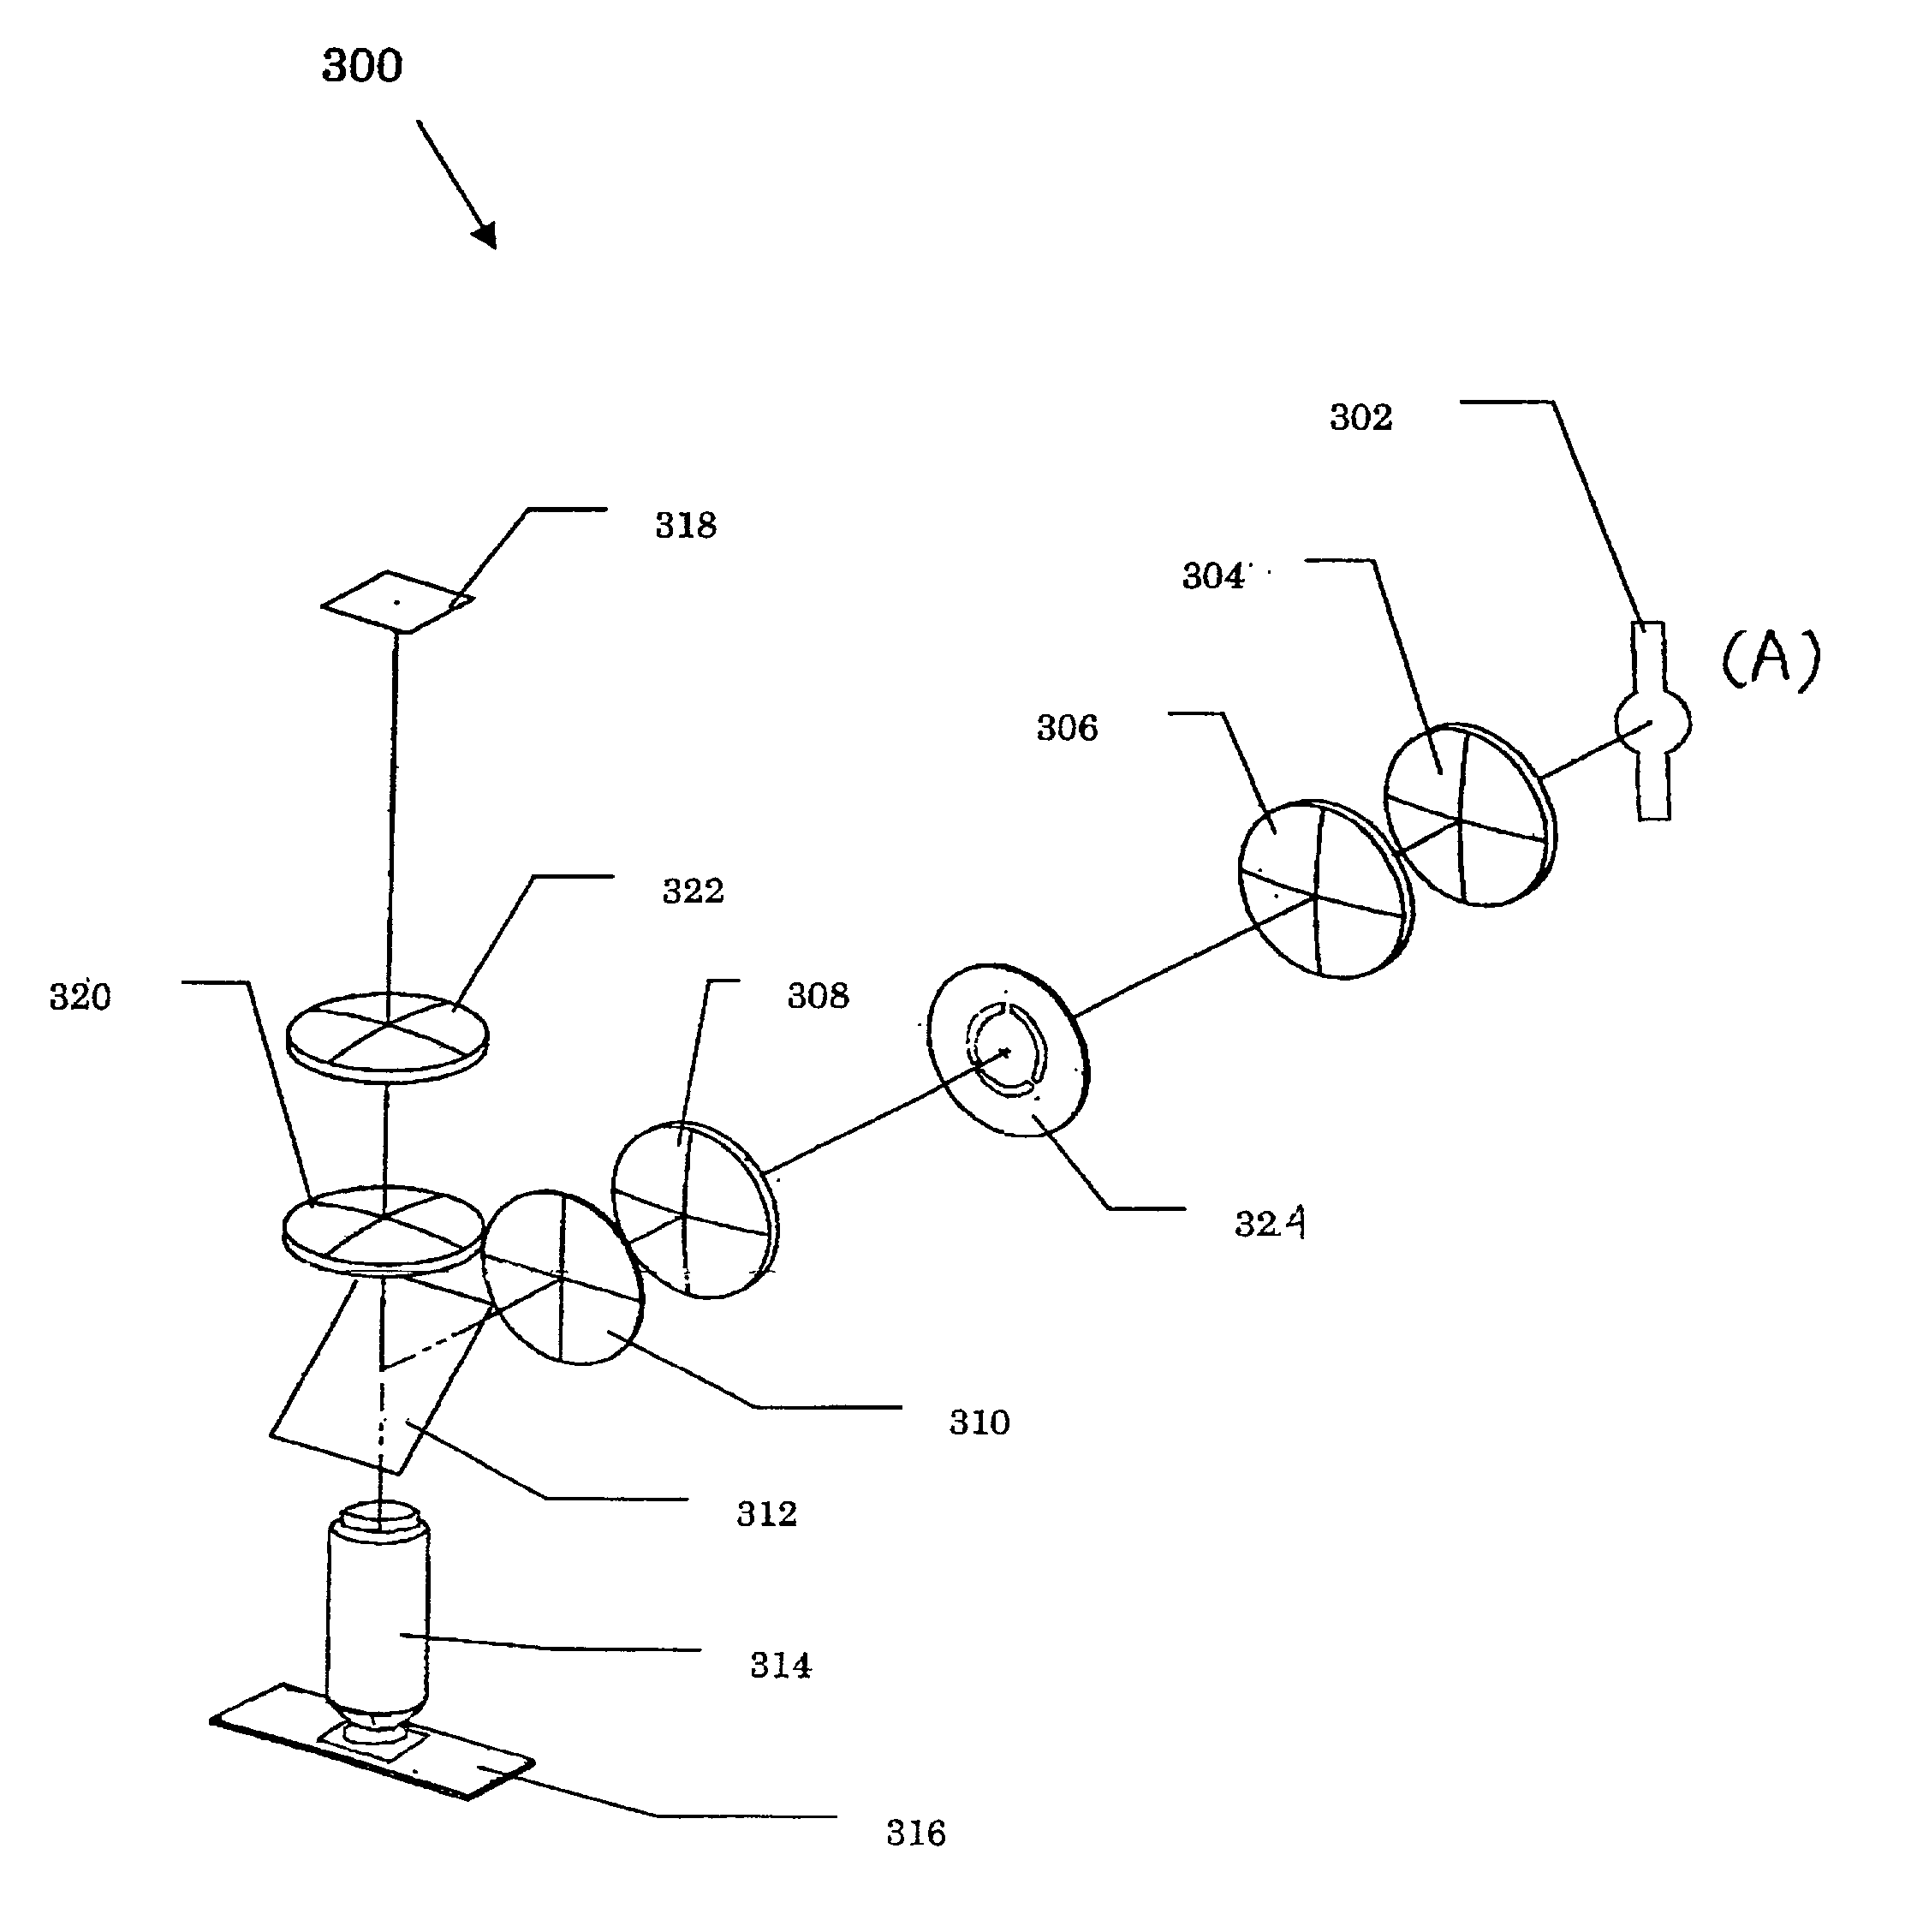 Total internal reflection fluorescence microscope having a conventional white-light source